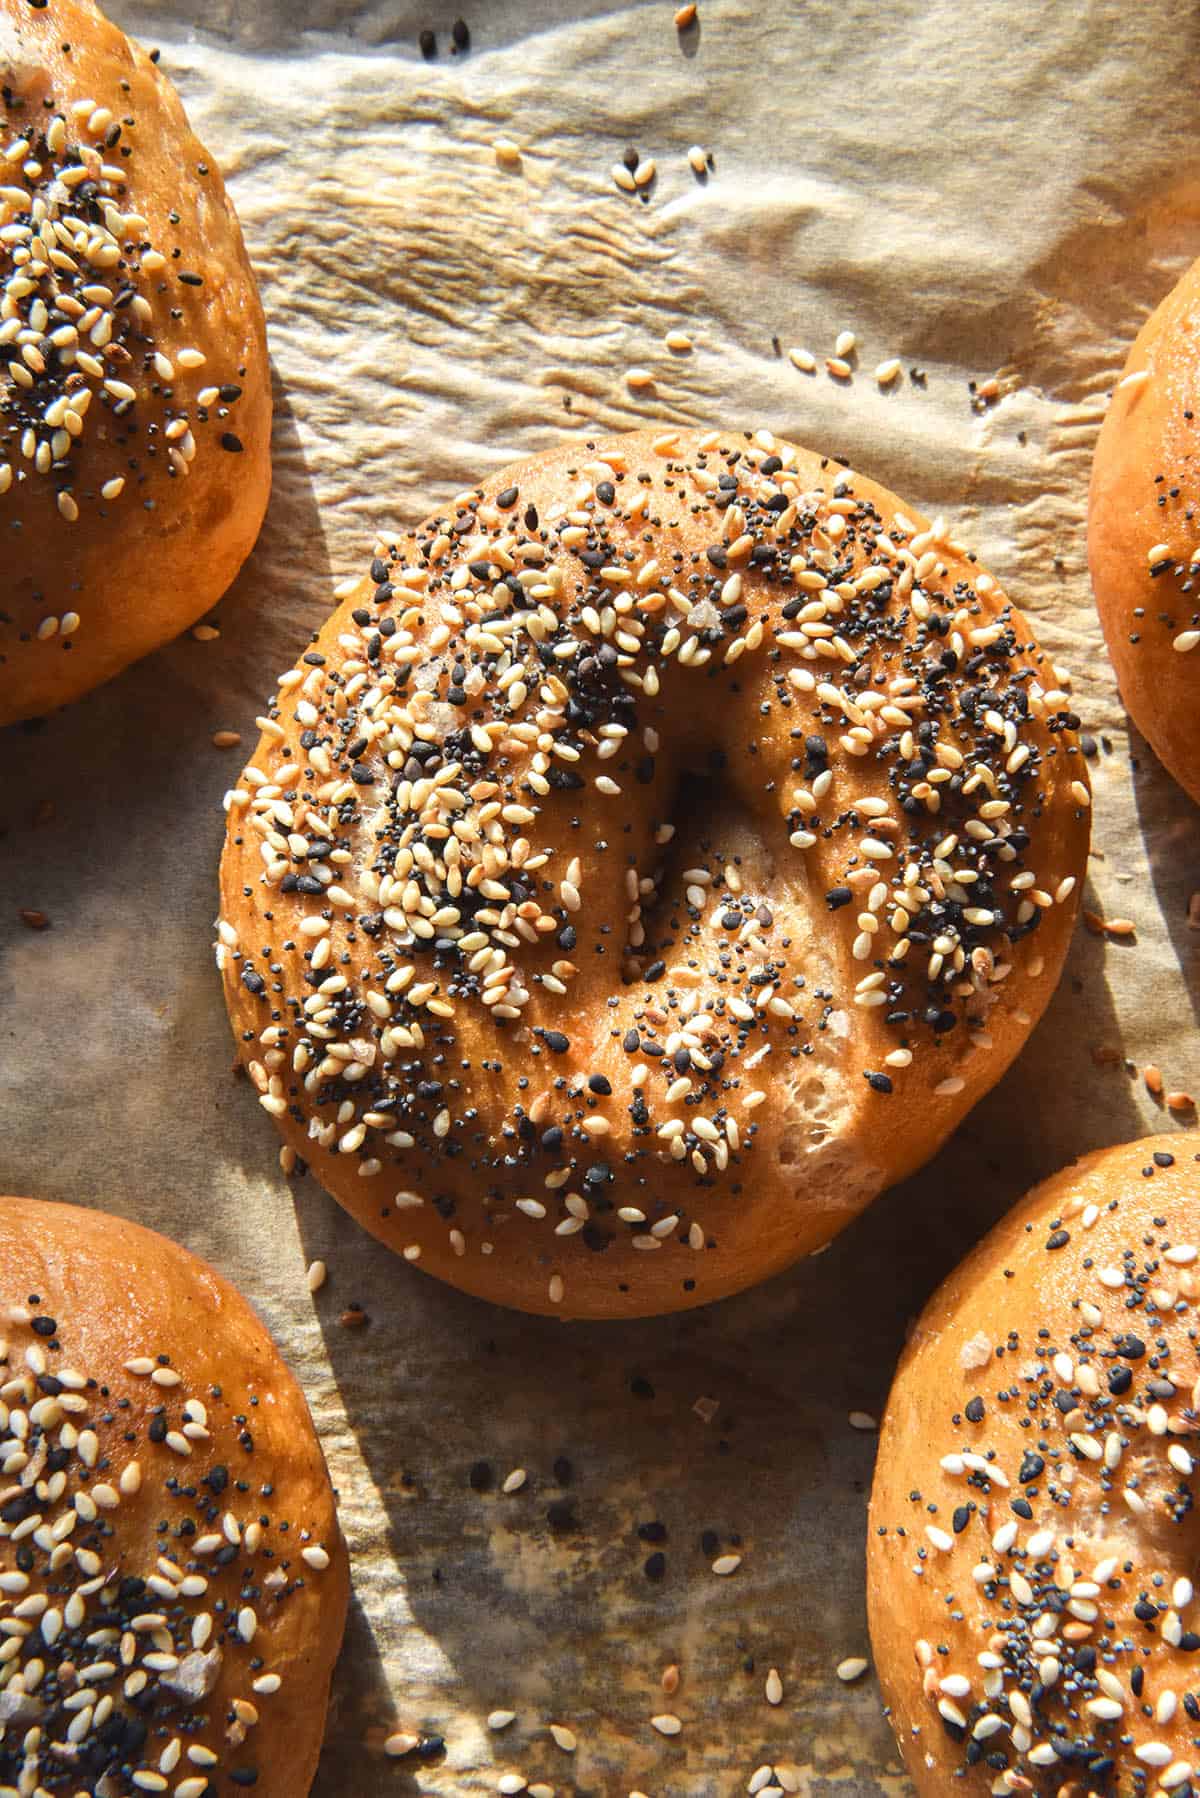 An aerial close up view of gluten free bagels sitting on a lined baking tray. The bagels are golden brown, covered in FODMAP friendly everything bagel seasoning, and bathed in warm sunlight